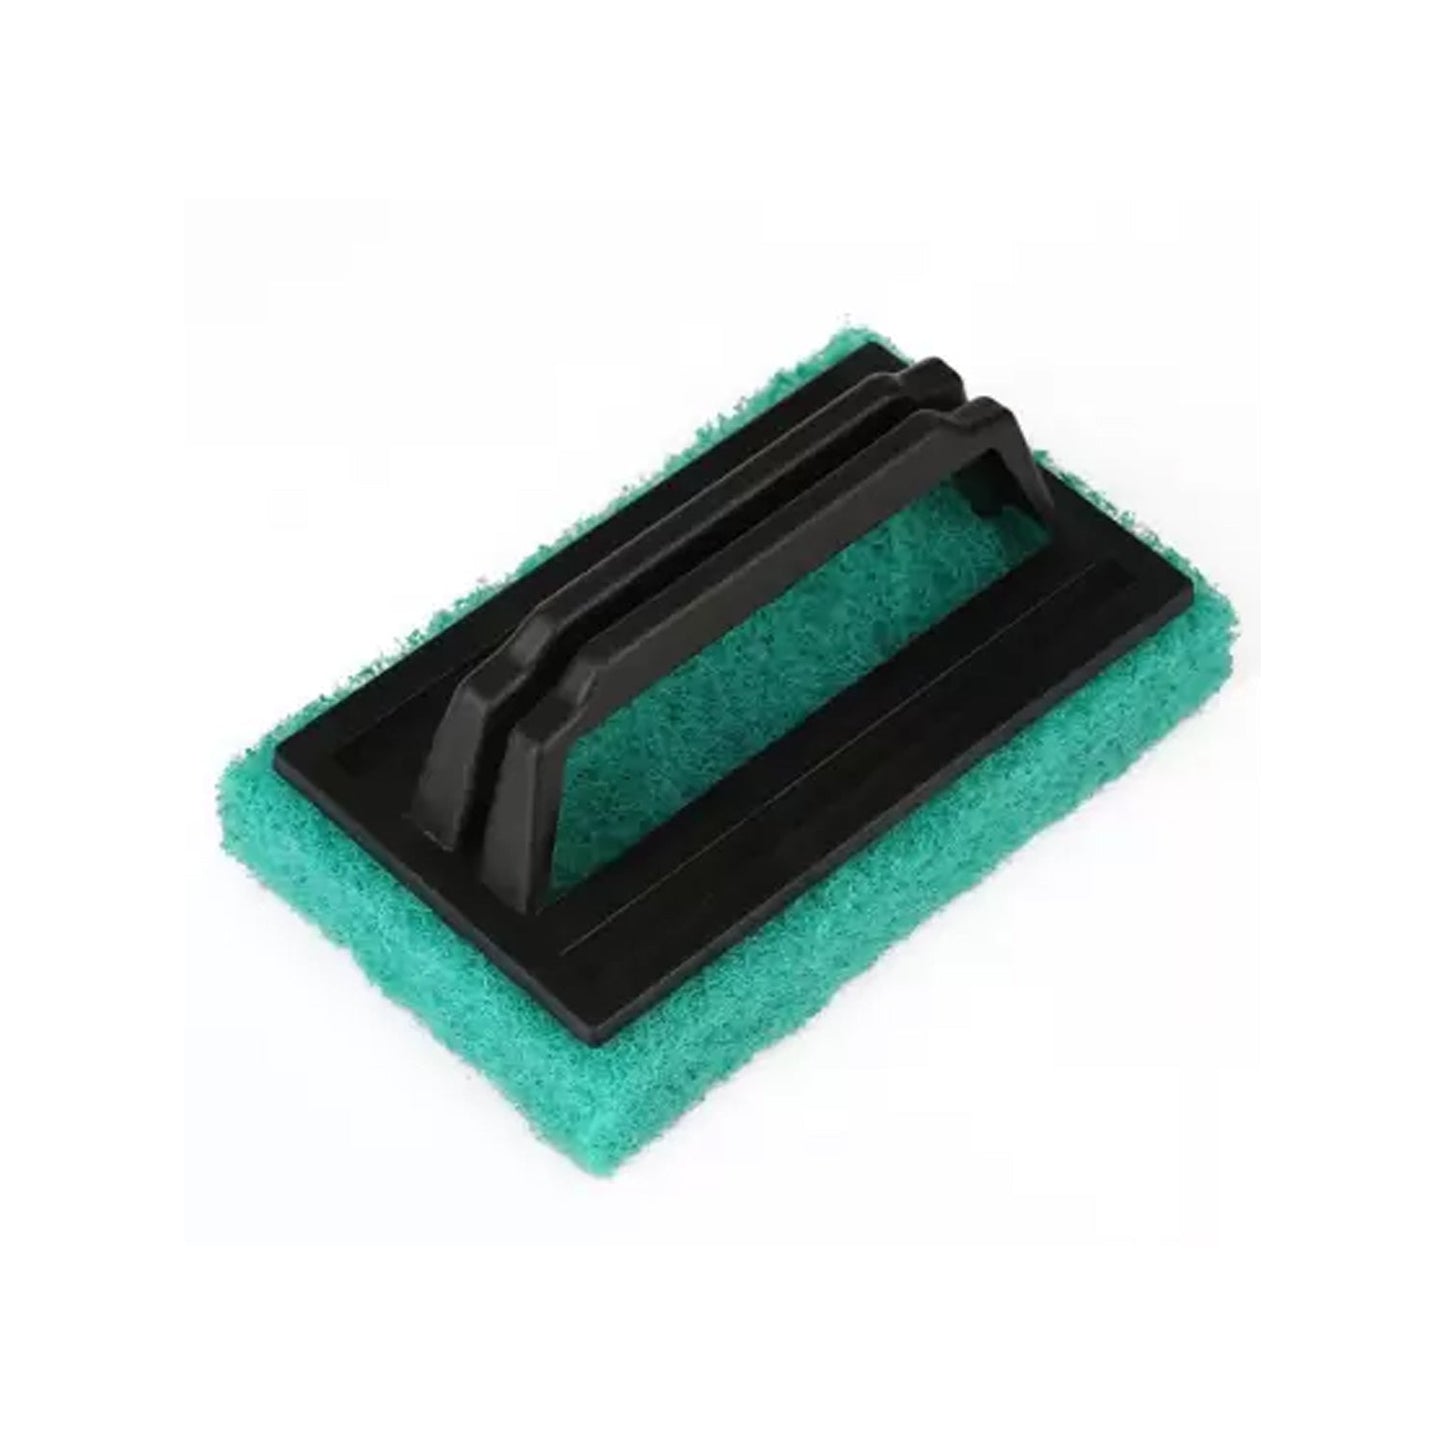 0222 Handle Scrubber Brush widely used by all types of peoples for washing utensils and stuffs in all kinds of bathroom and kitchen places etc. DeoDap